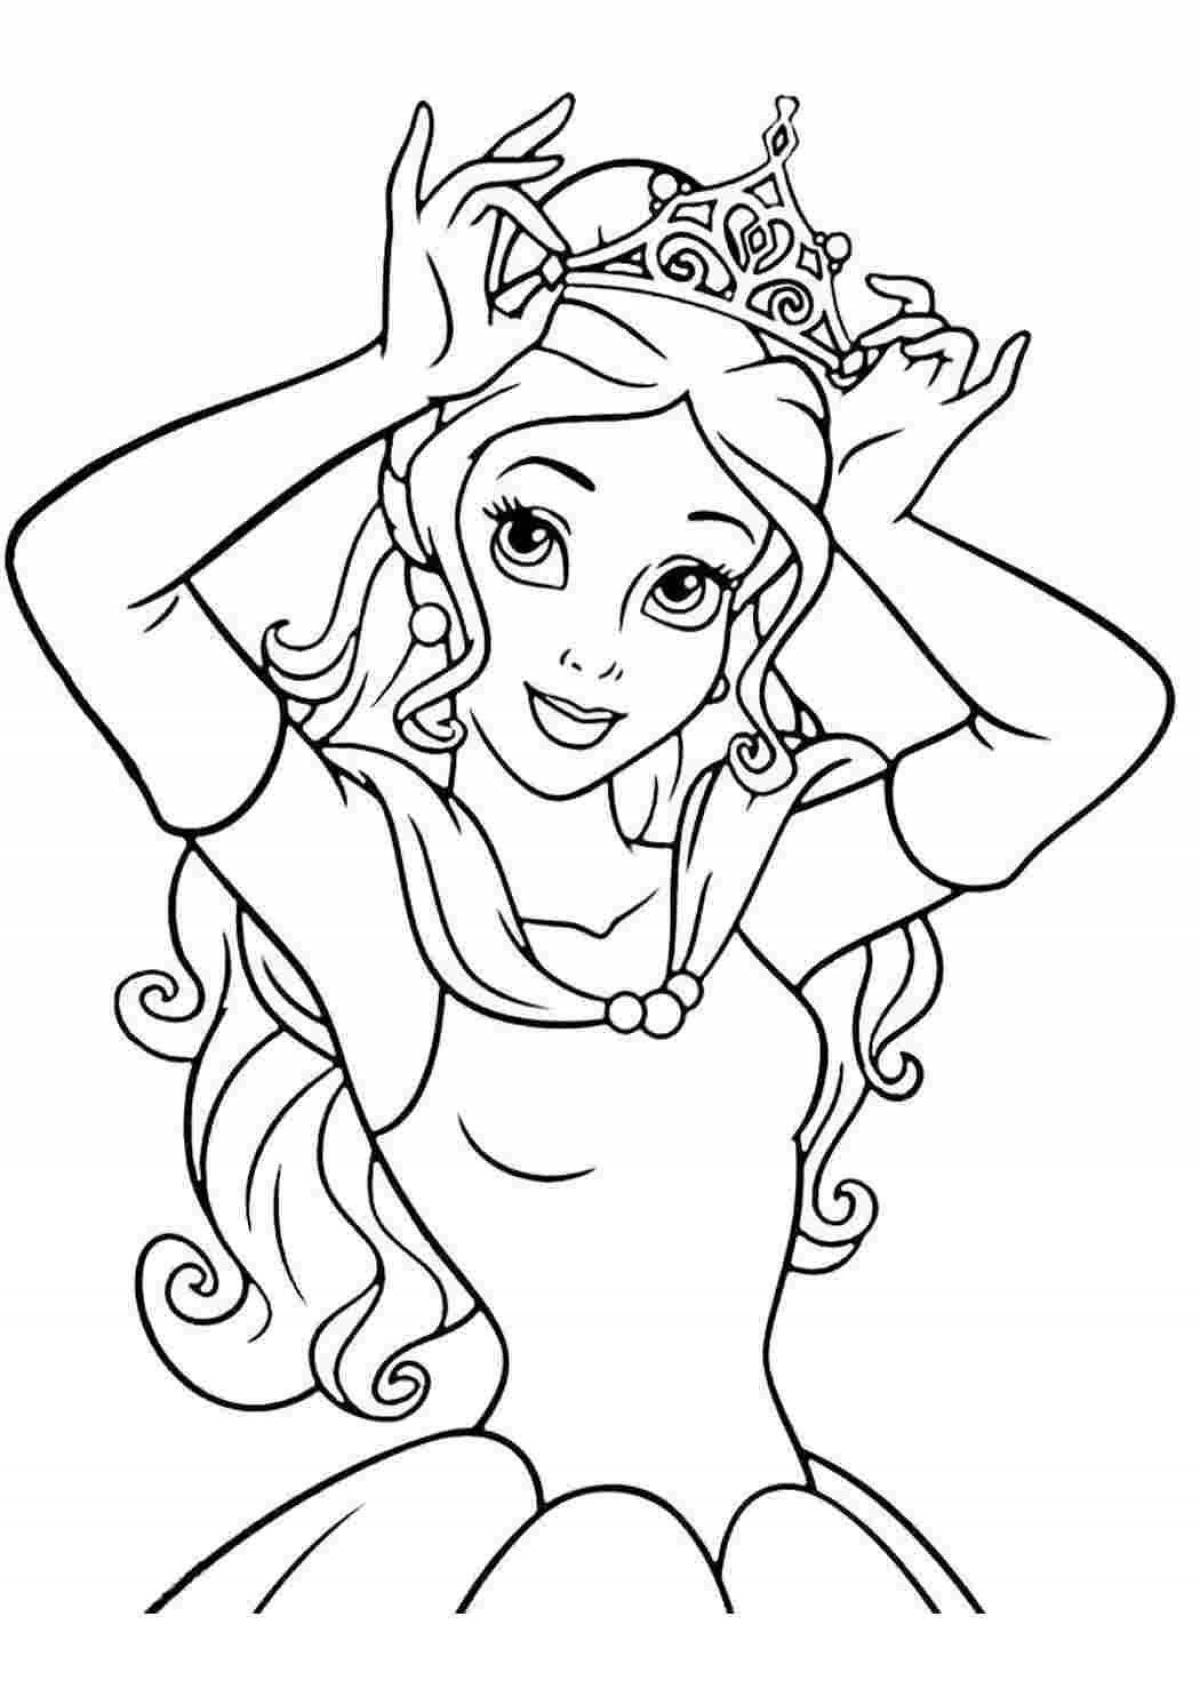 Charming princess coloring pages